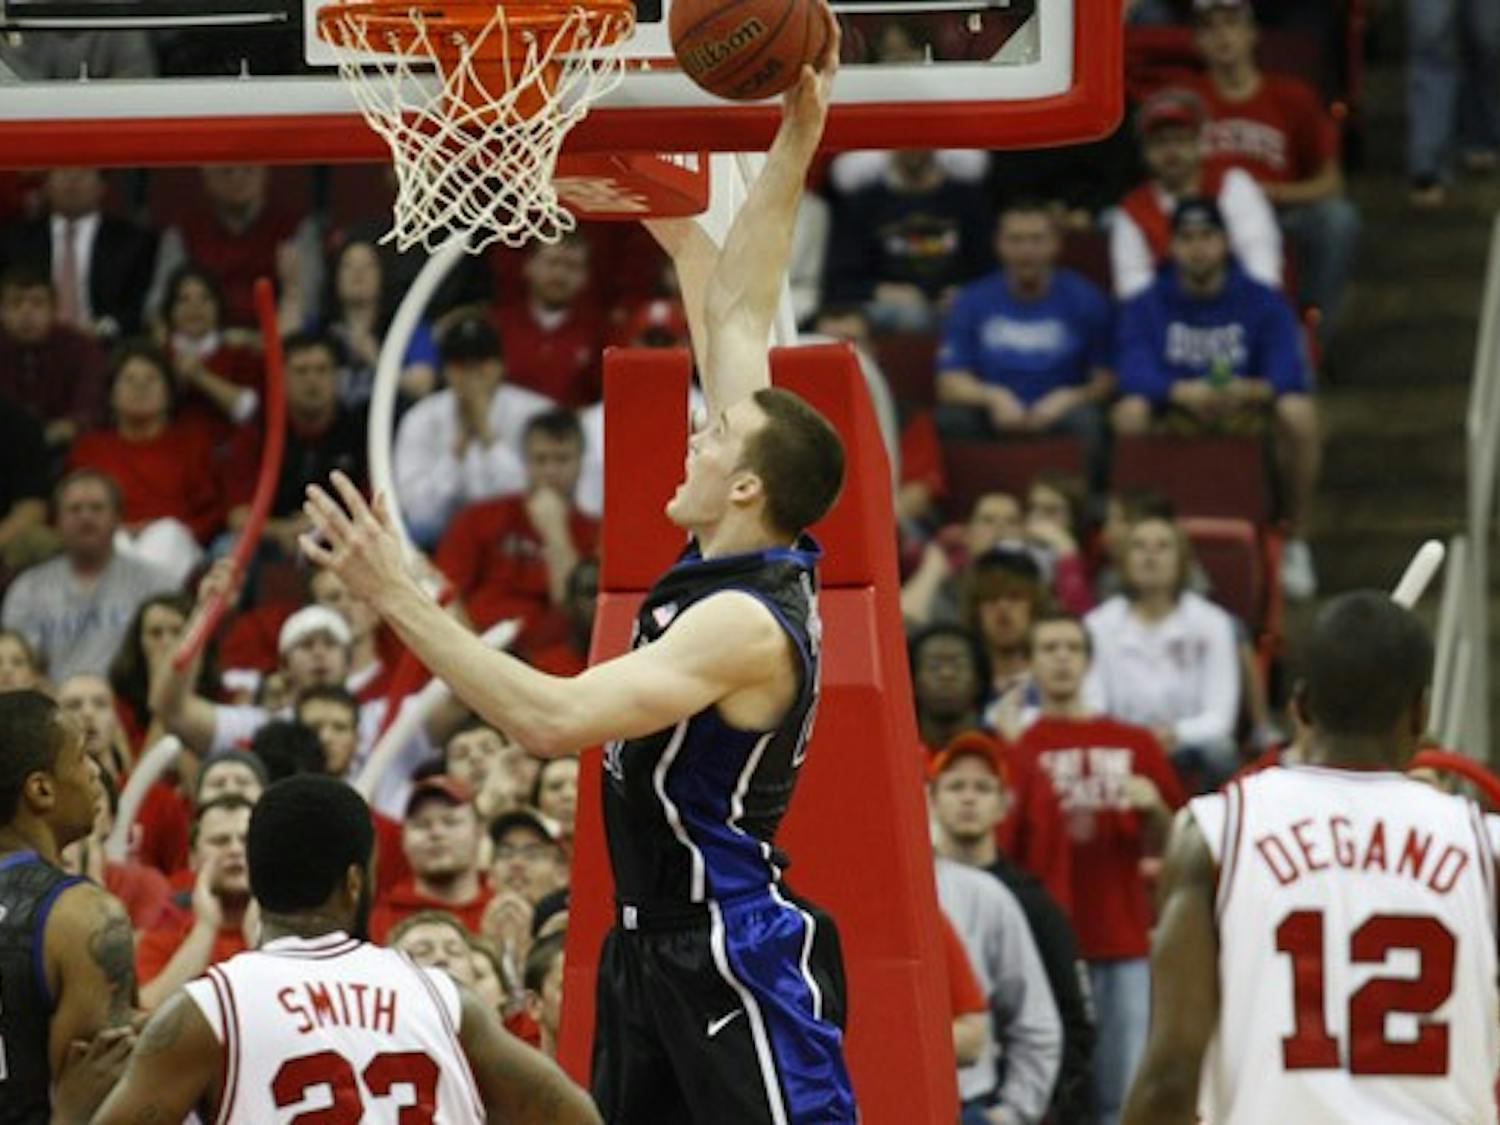 Sophomore Miles Plumlee failed to make an impact on either end of the floor Wednesday.